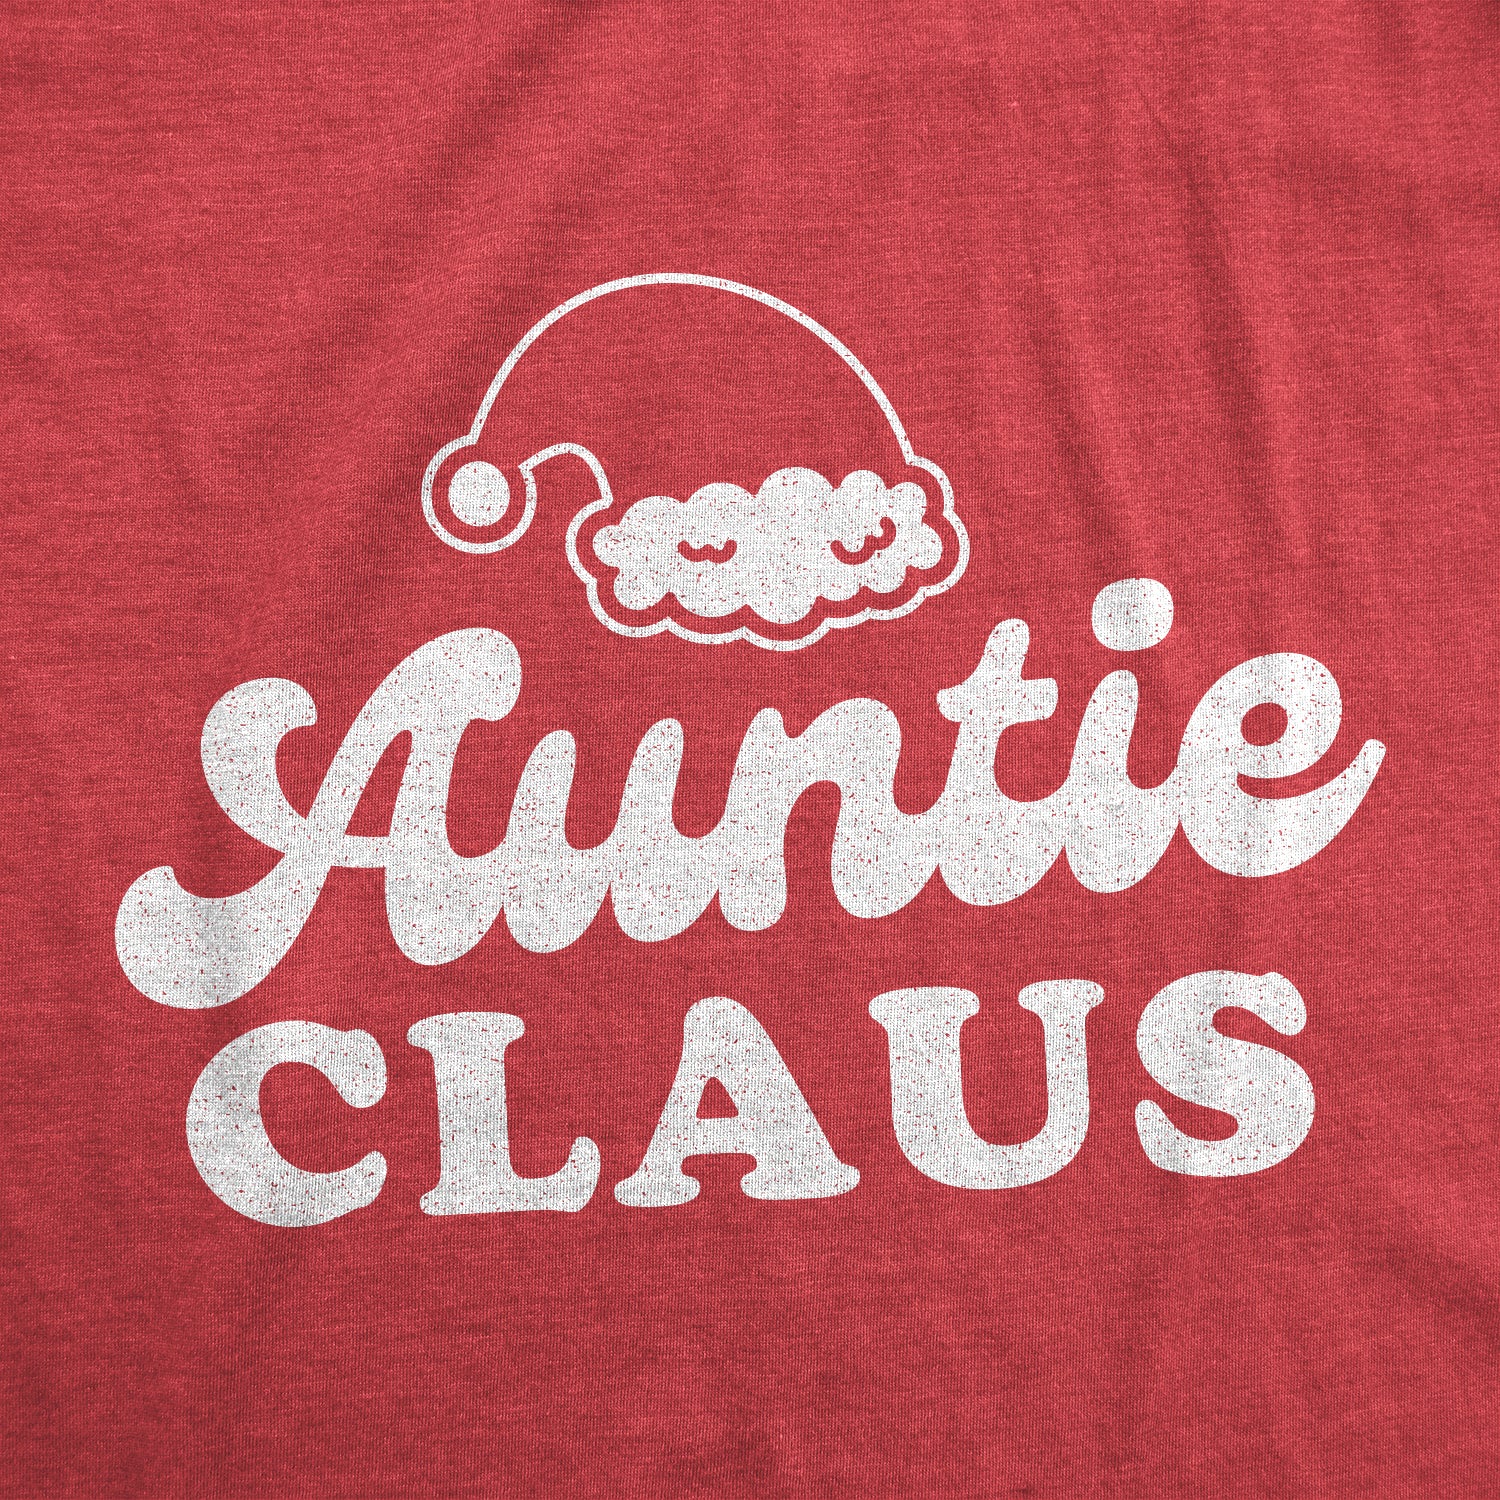 Funny Heather Red - Auntie Auntie Claus Womens T Shirt Nerdy Christmas Aunt Tee